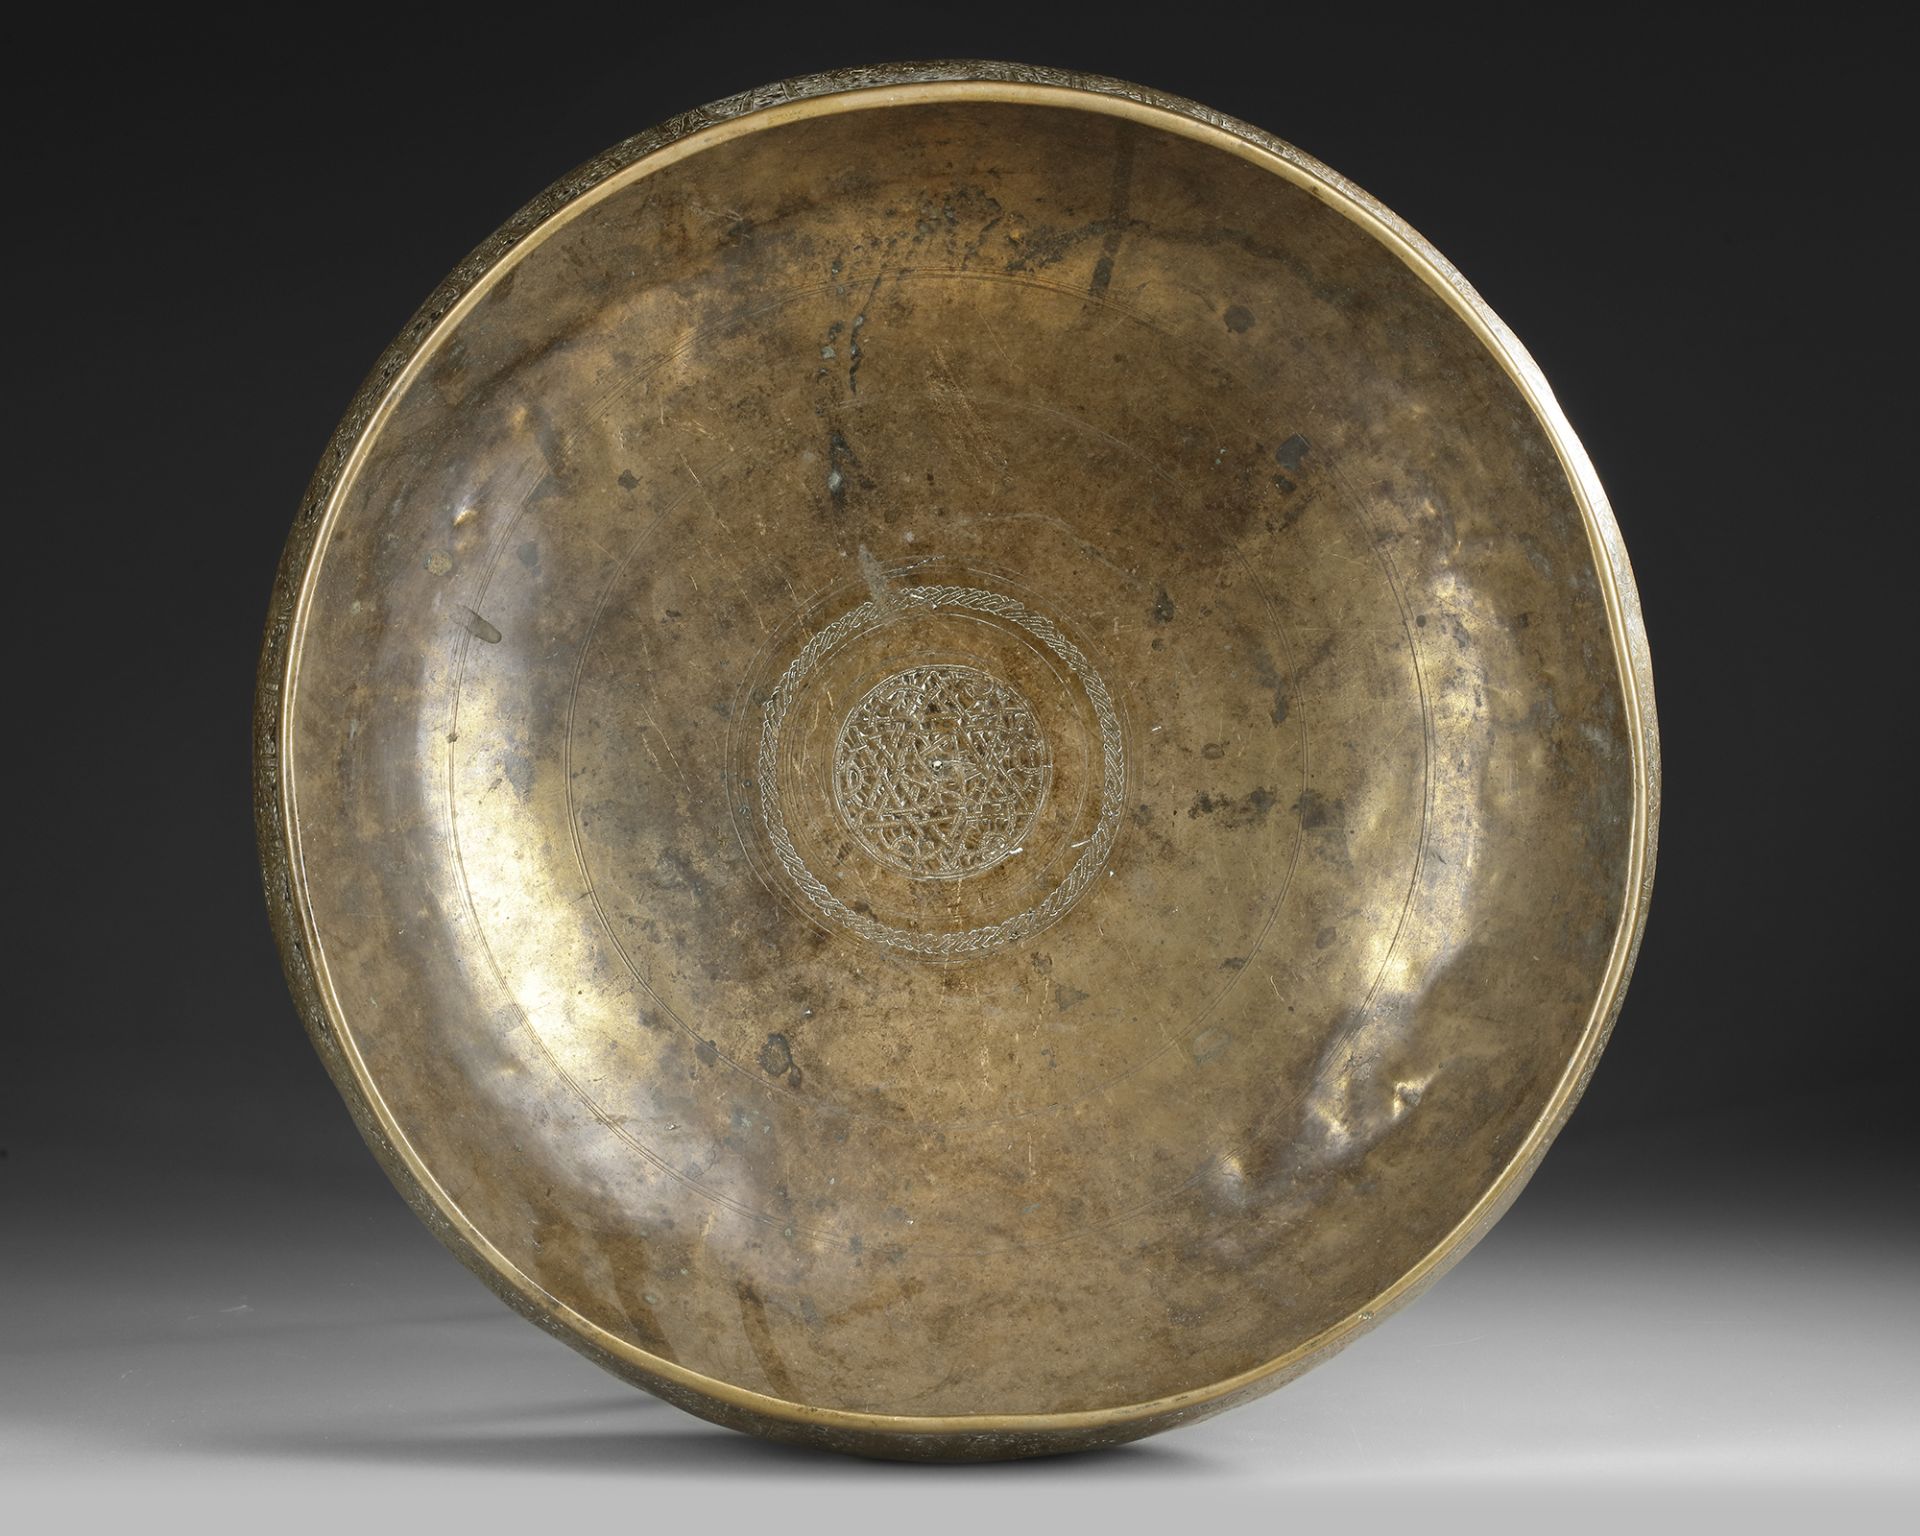 A LARGE MAMLUK BRASS BOWL WITH INSCRIPTIONS, EGYPT OR SYRIA, 14TH CENTURY - Image 3 of 4